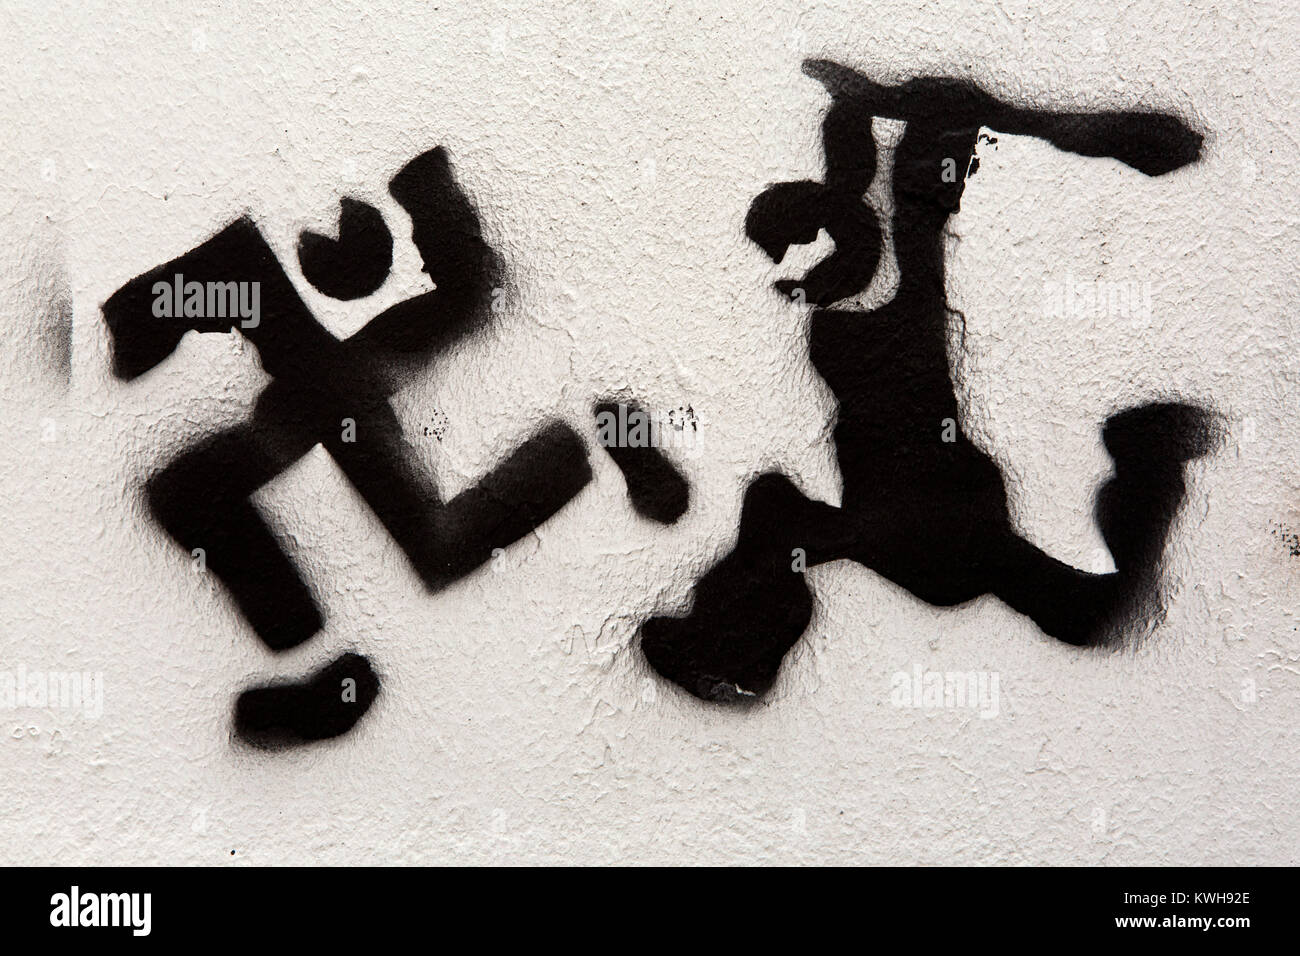 Graffiti in Maribor, Slovenia. The stencilled work depicts a swastika being clubbed. Stock Photo